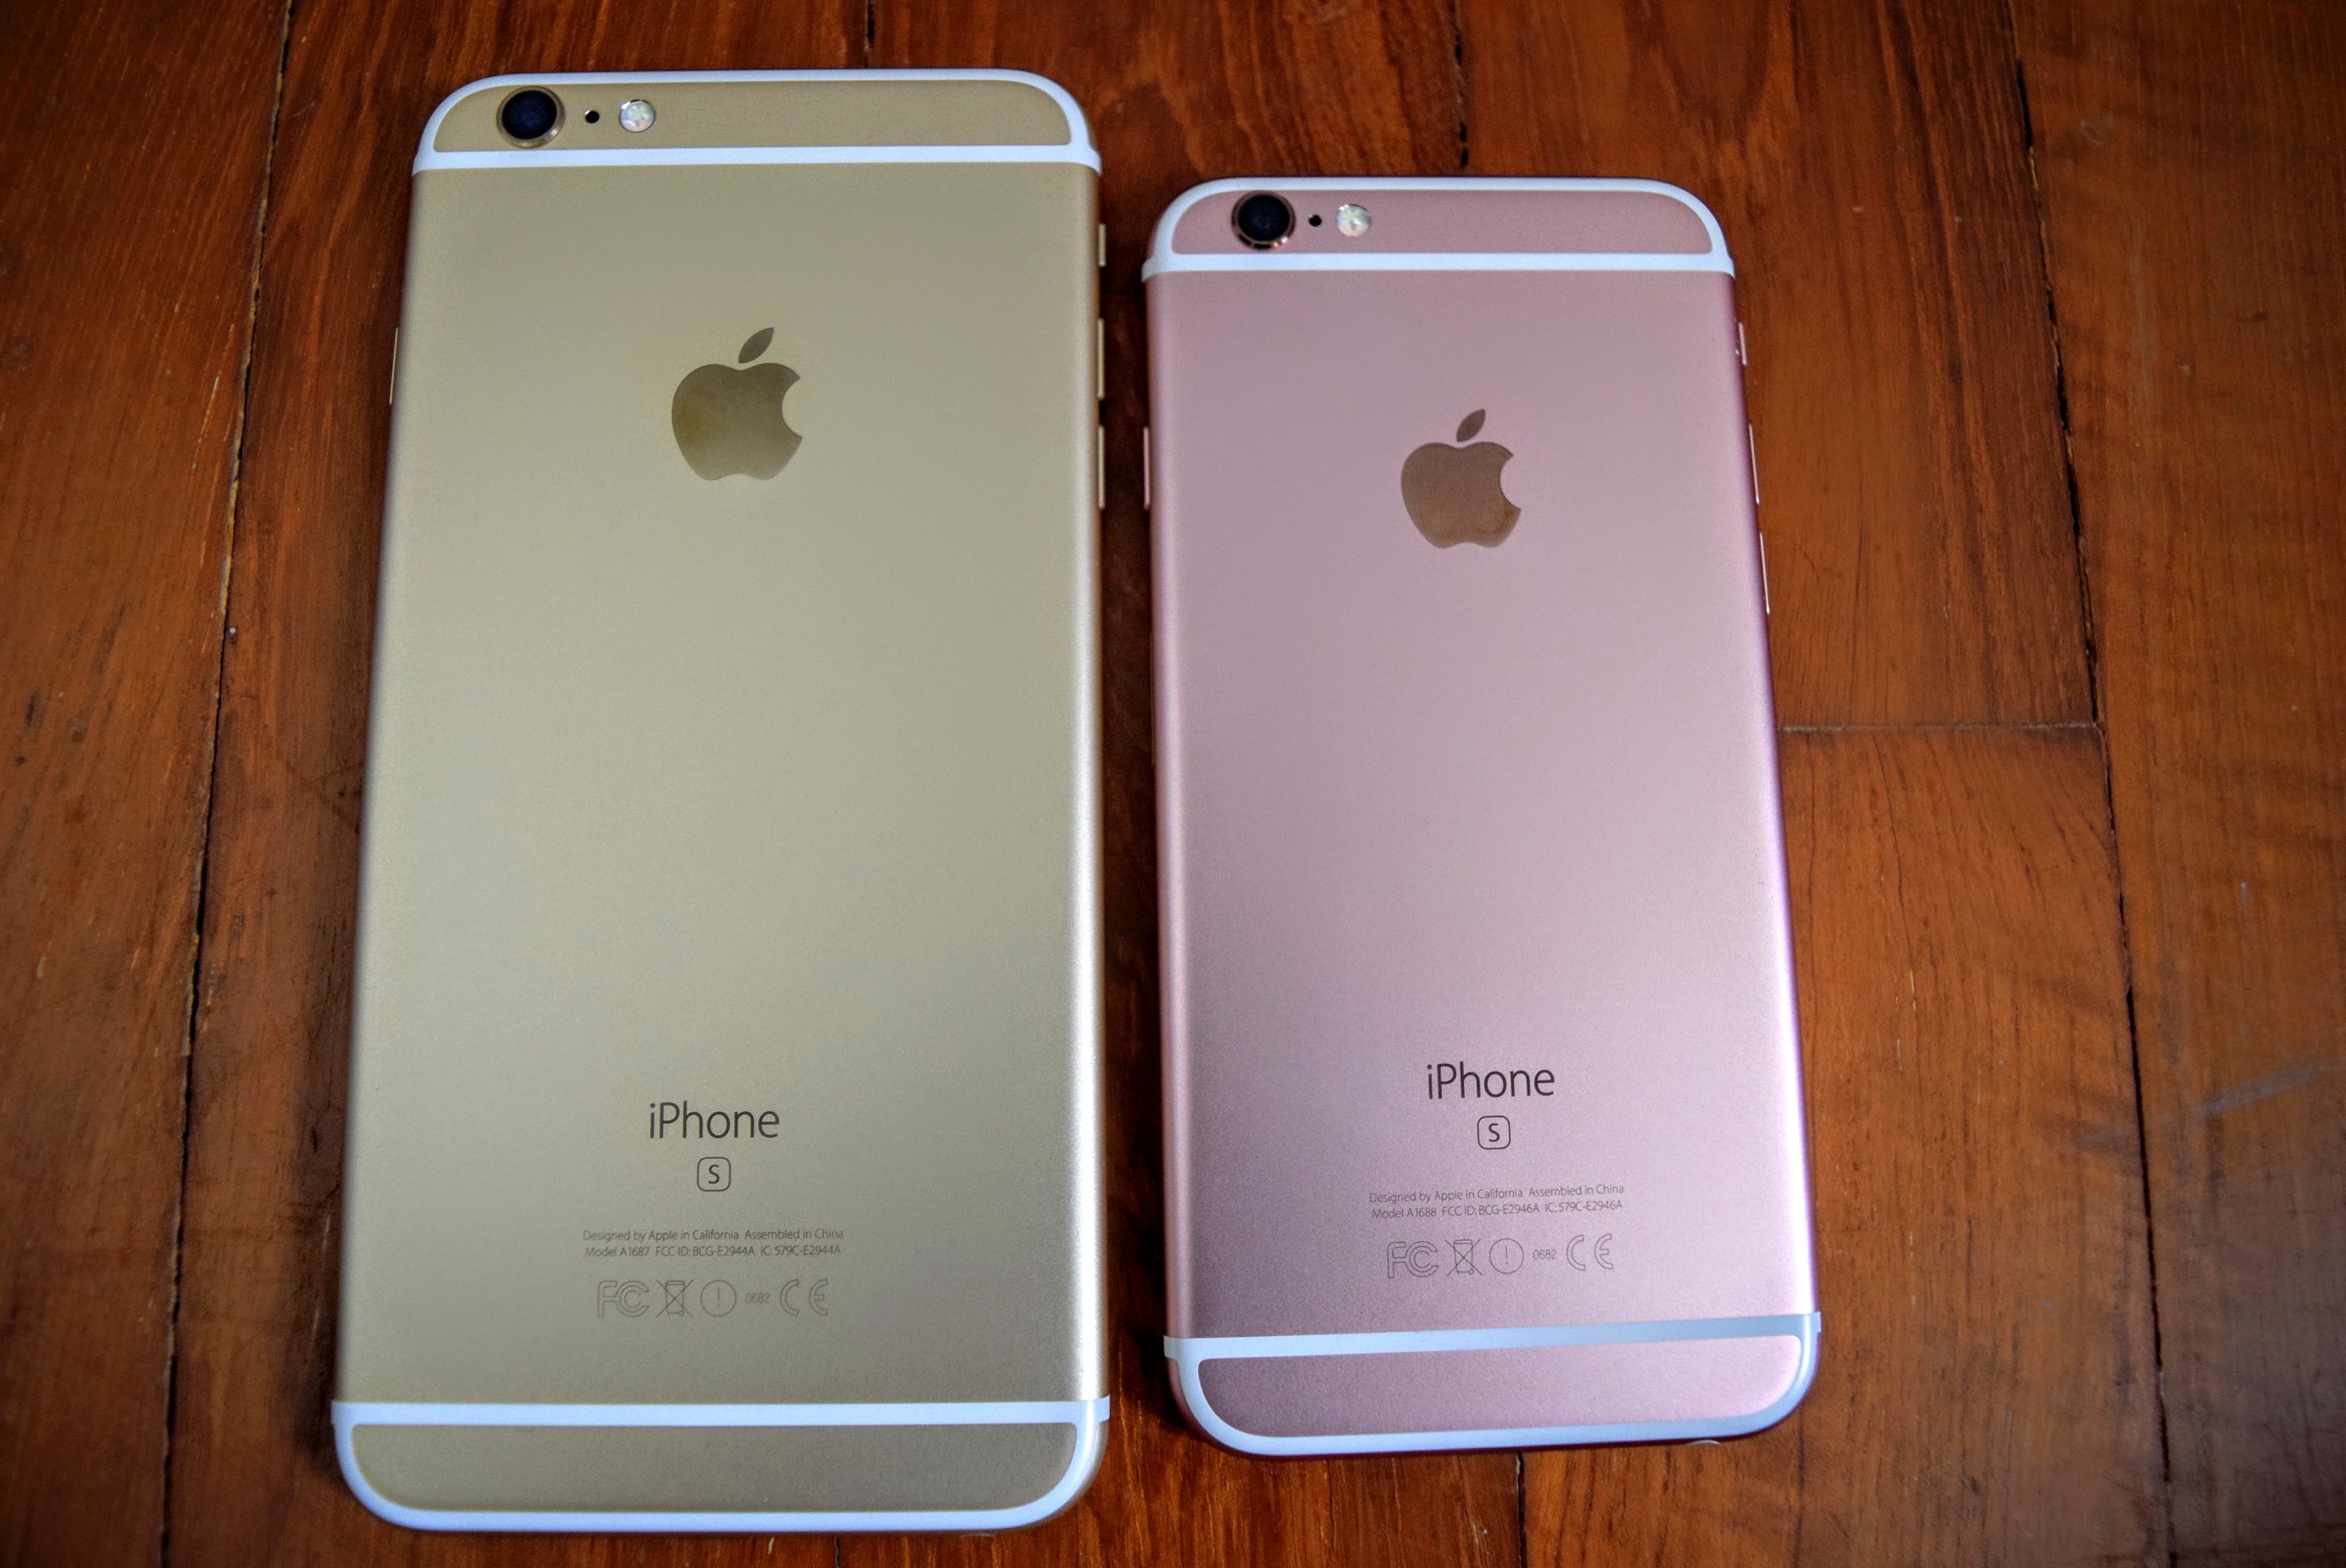 Apple Cuts Down Price of Iphone 6s and Iphone 6s Plus in India